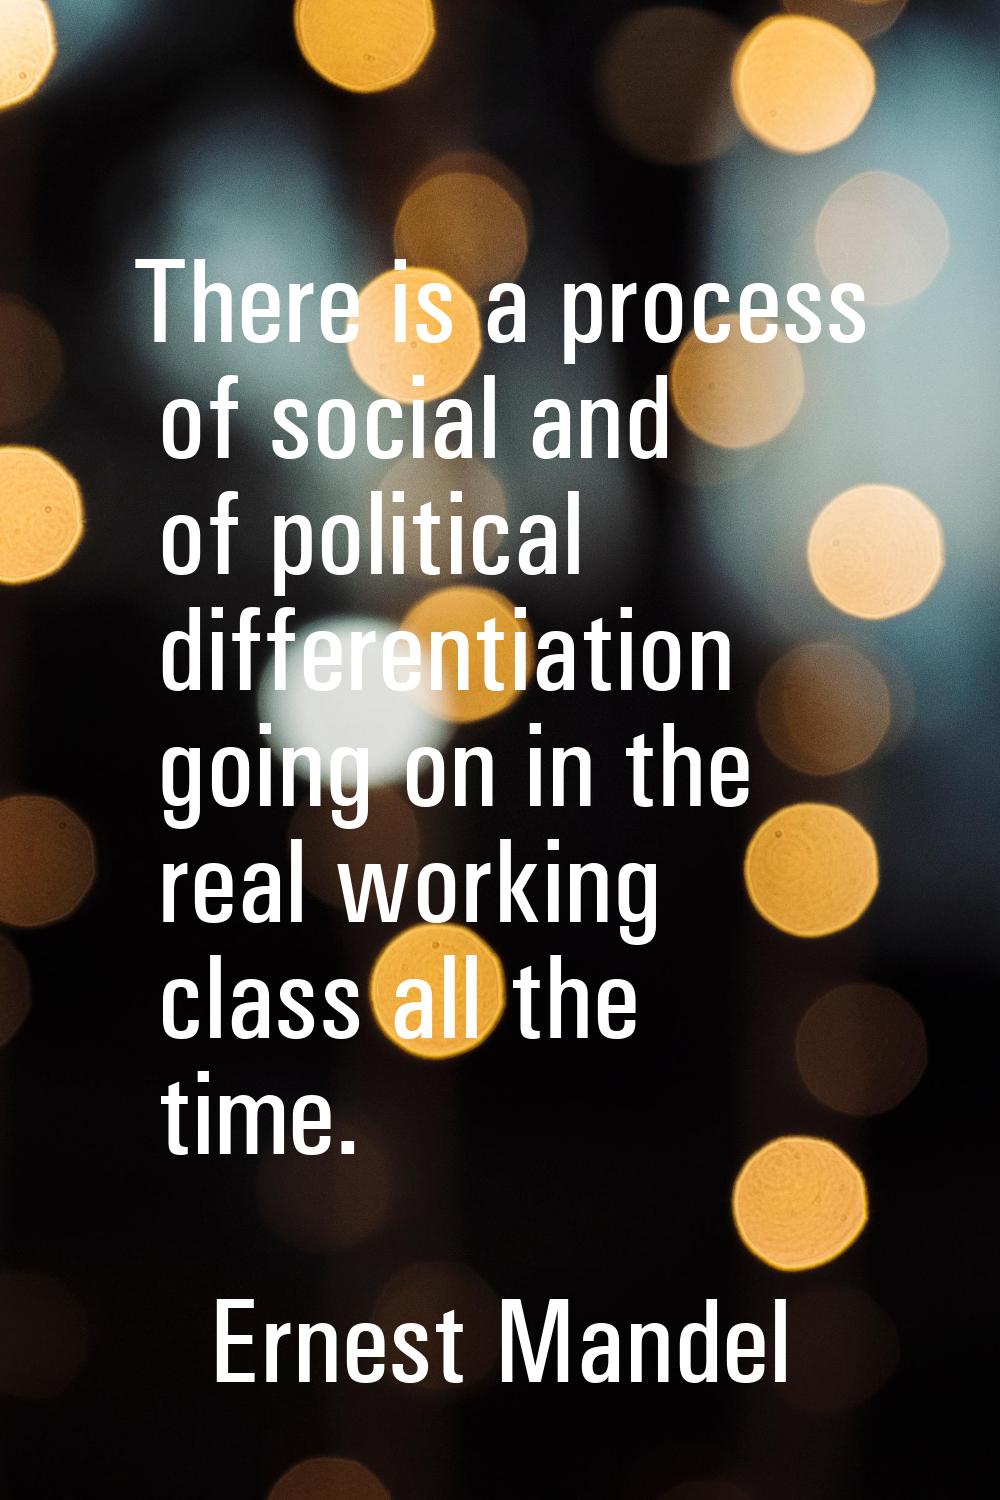 There is a process of social and of political differentiation going on in the real working class al